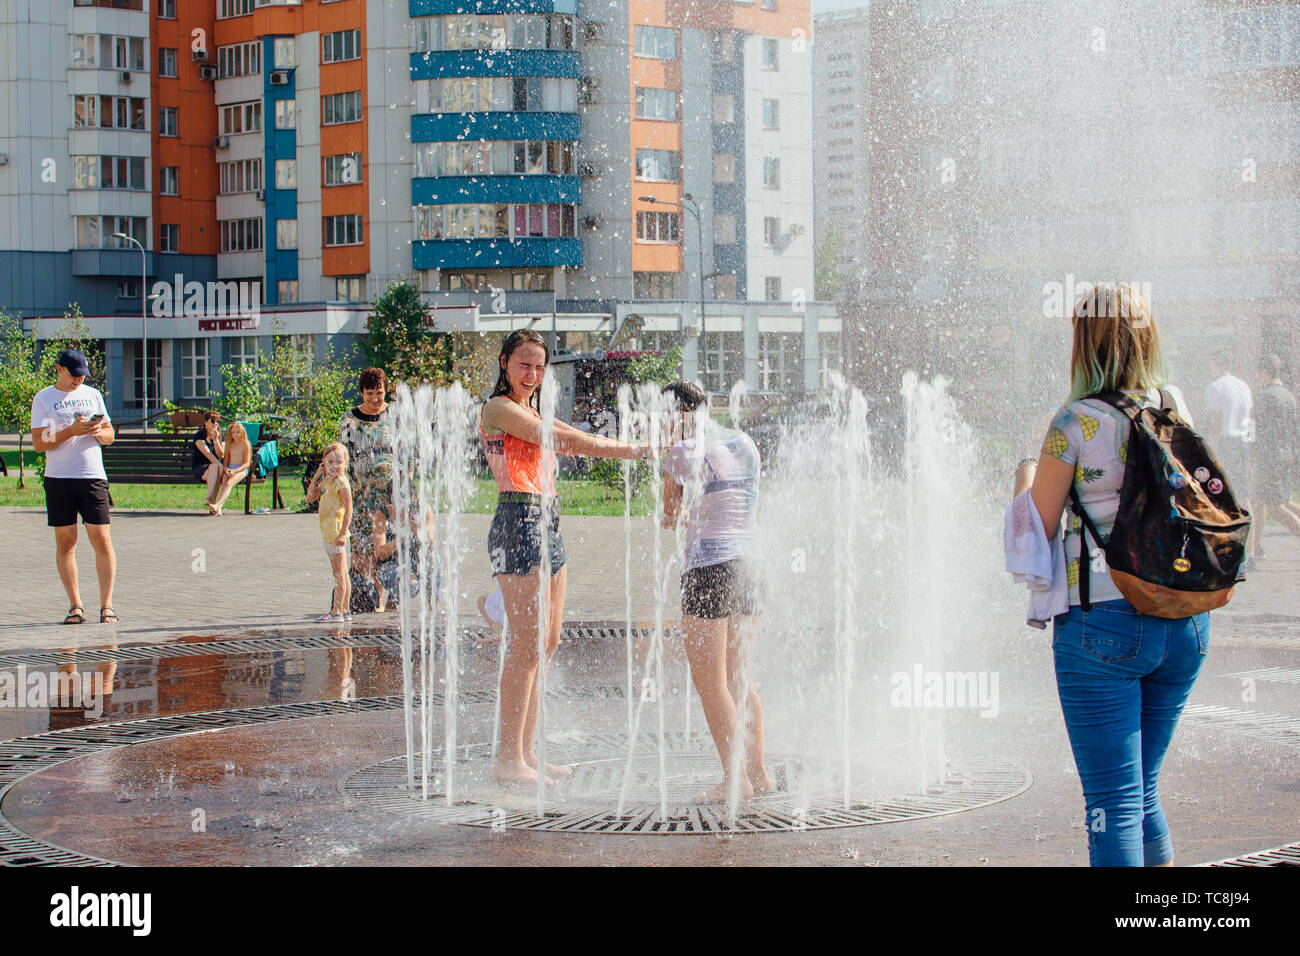 Novokuznetsk, Kemerovo Region, Russia - August 04, 2018: Happy teenagers splashing in a water of a city fountain and enjoying the cool streams of Stock Photo